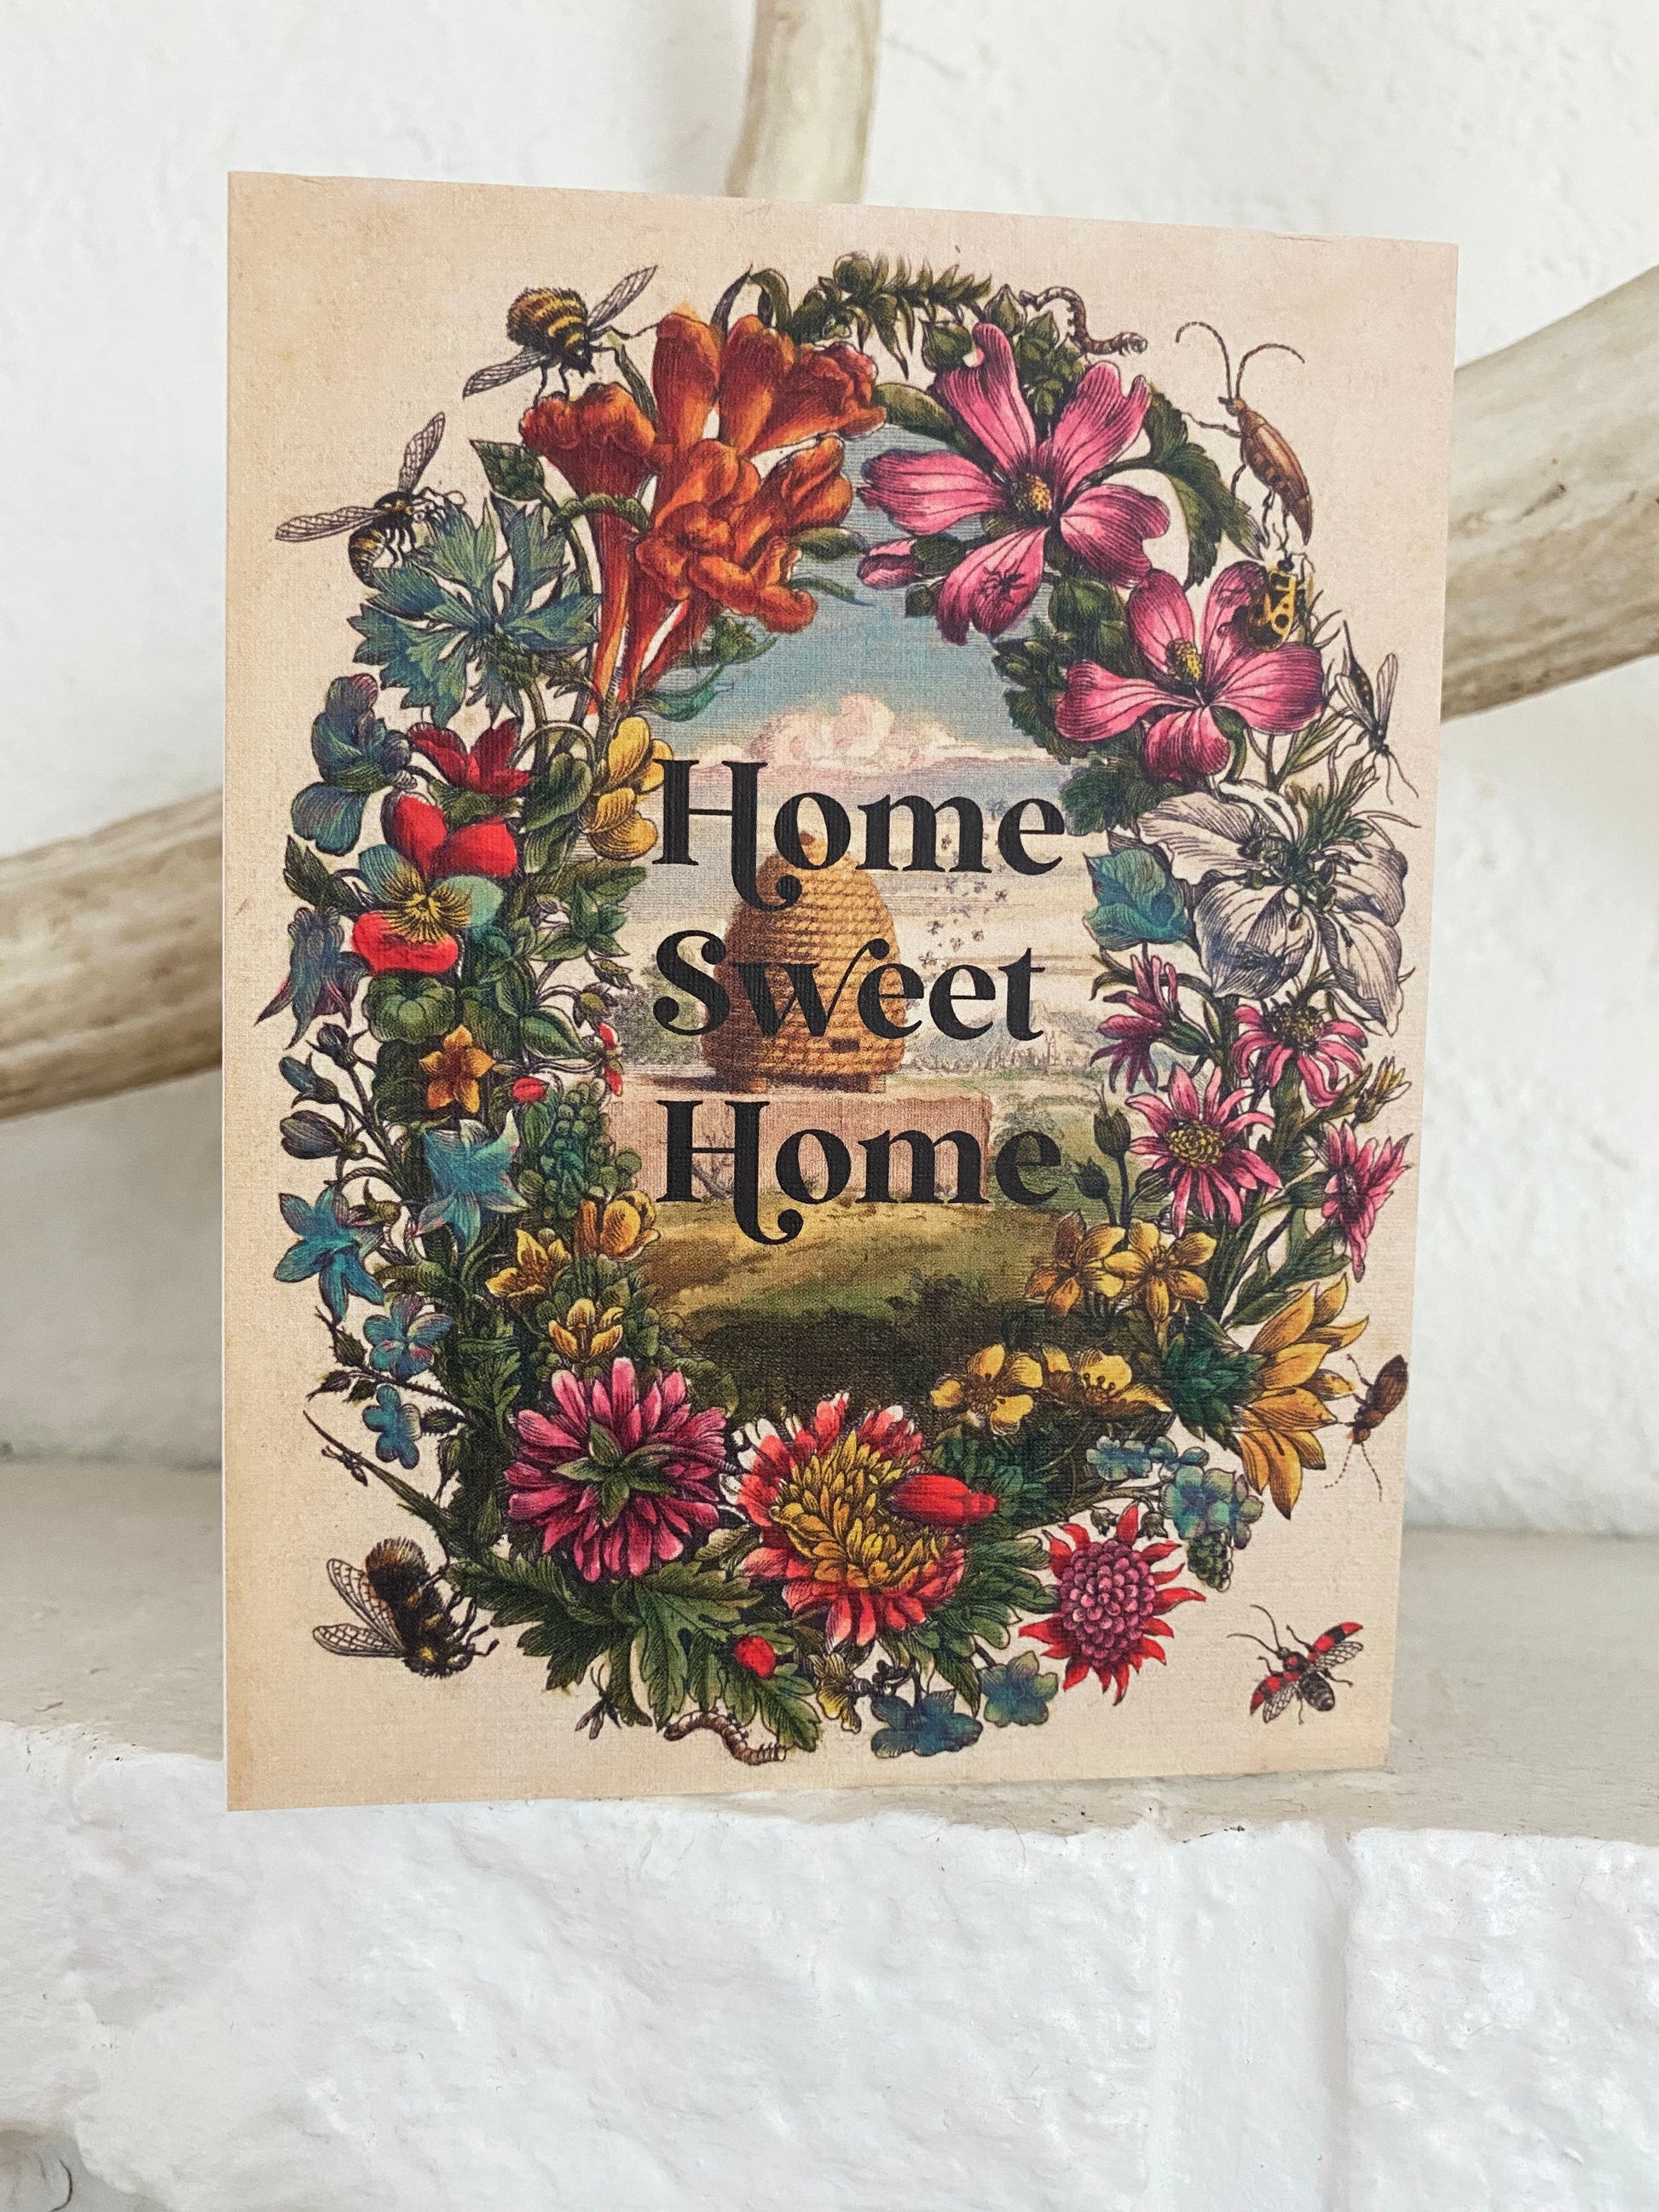 cute vintage retro style card with beehive home sweet home classic woodland garden flowers card Coin Laundry card pink red flowers garden